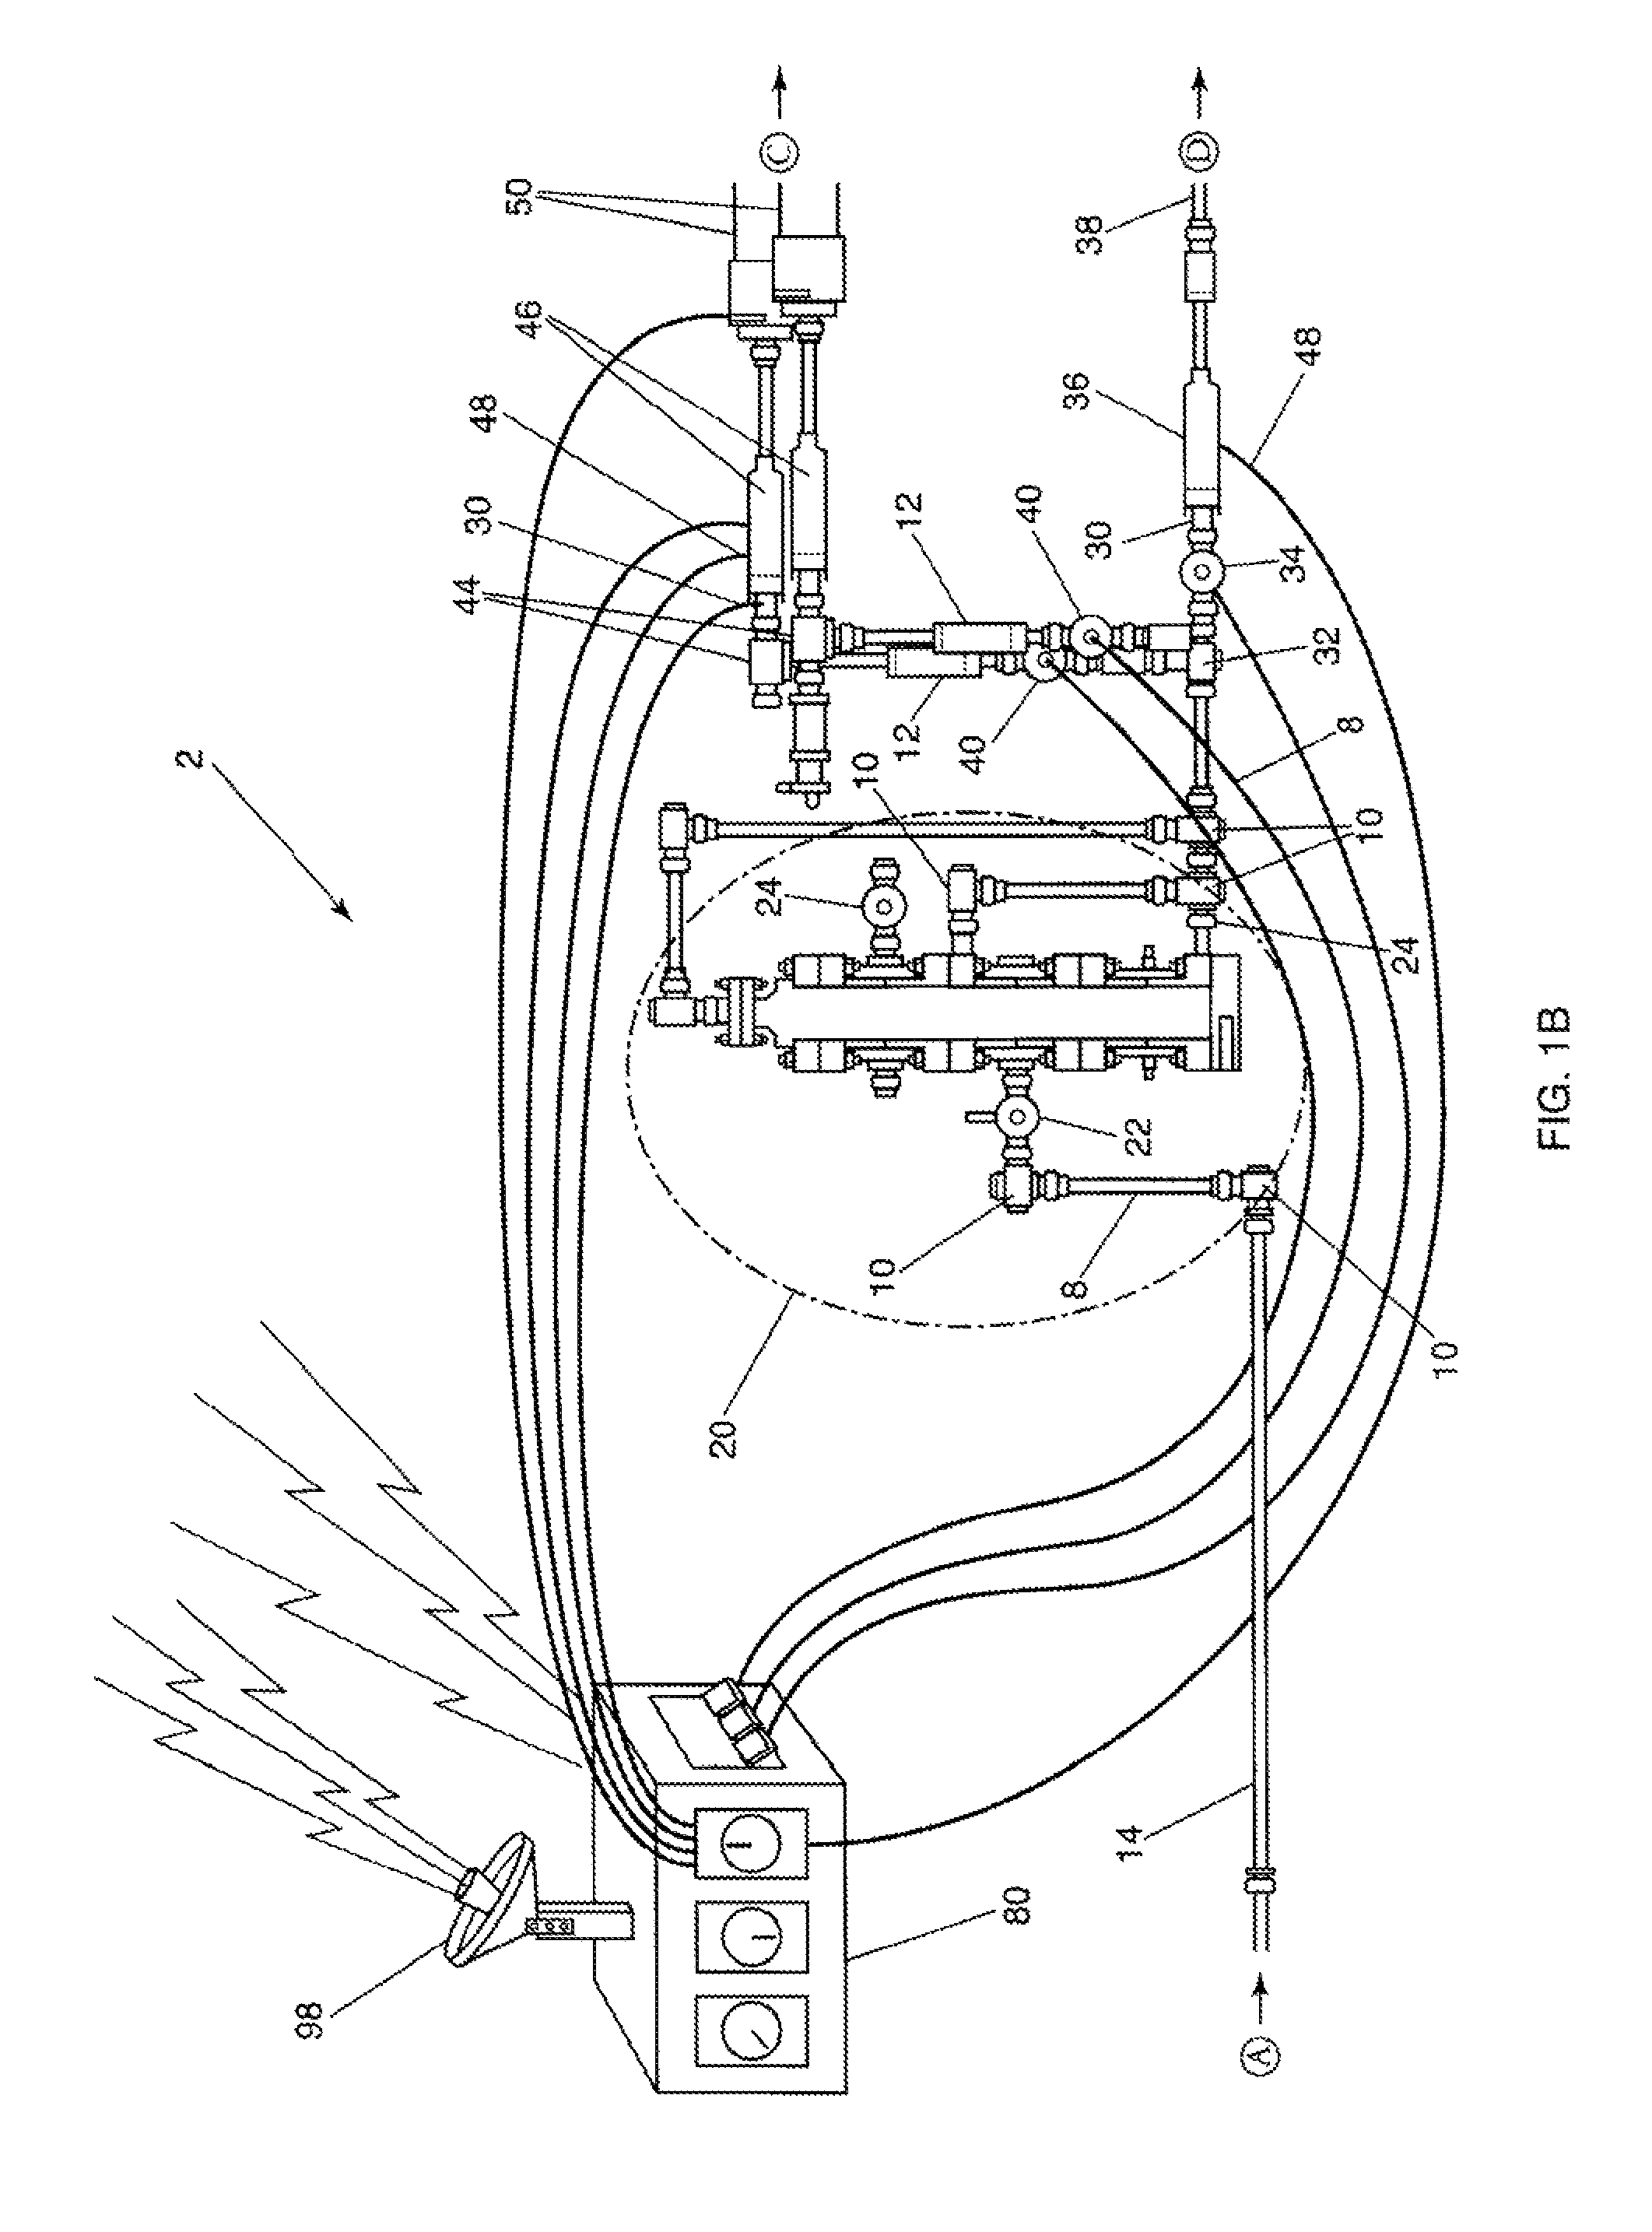 Automated closed loop flowback and separation system